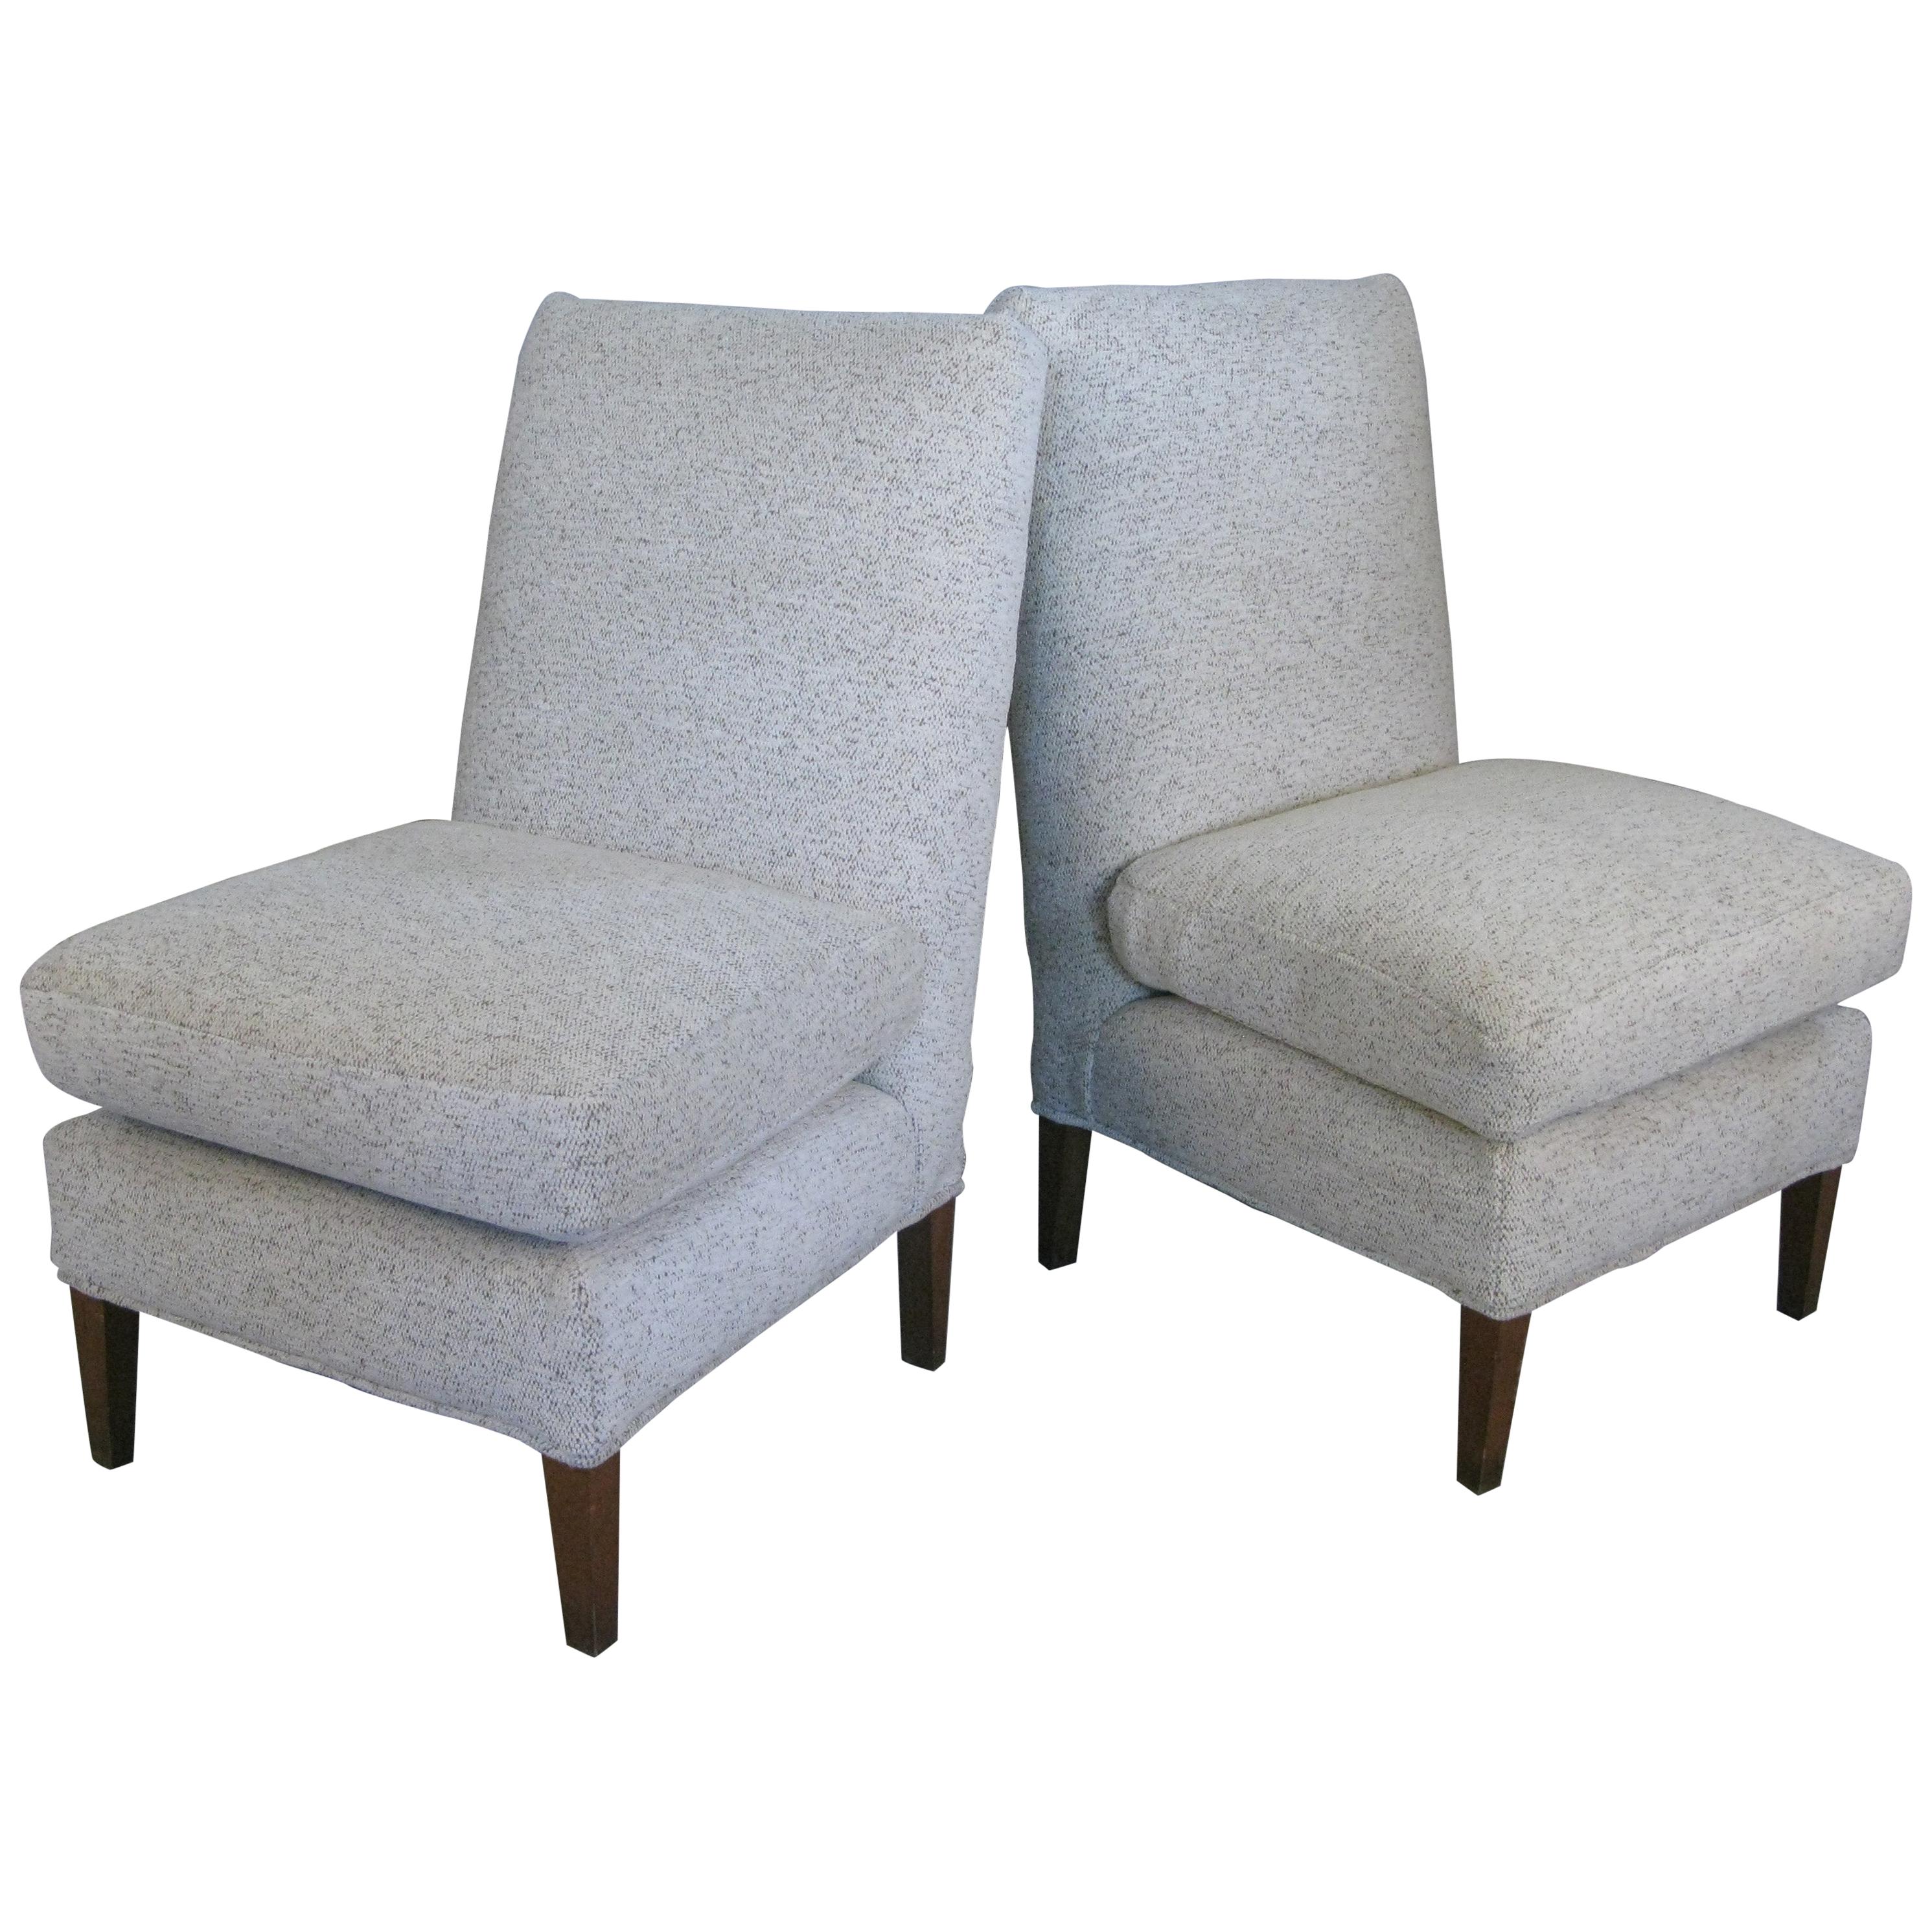 Pair of 1960s Upholstered Slipper Lounge Chairs